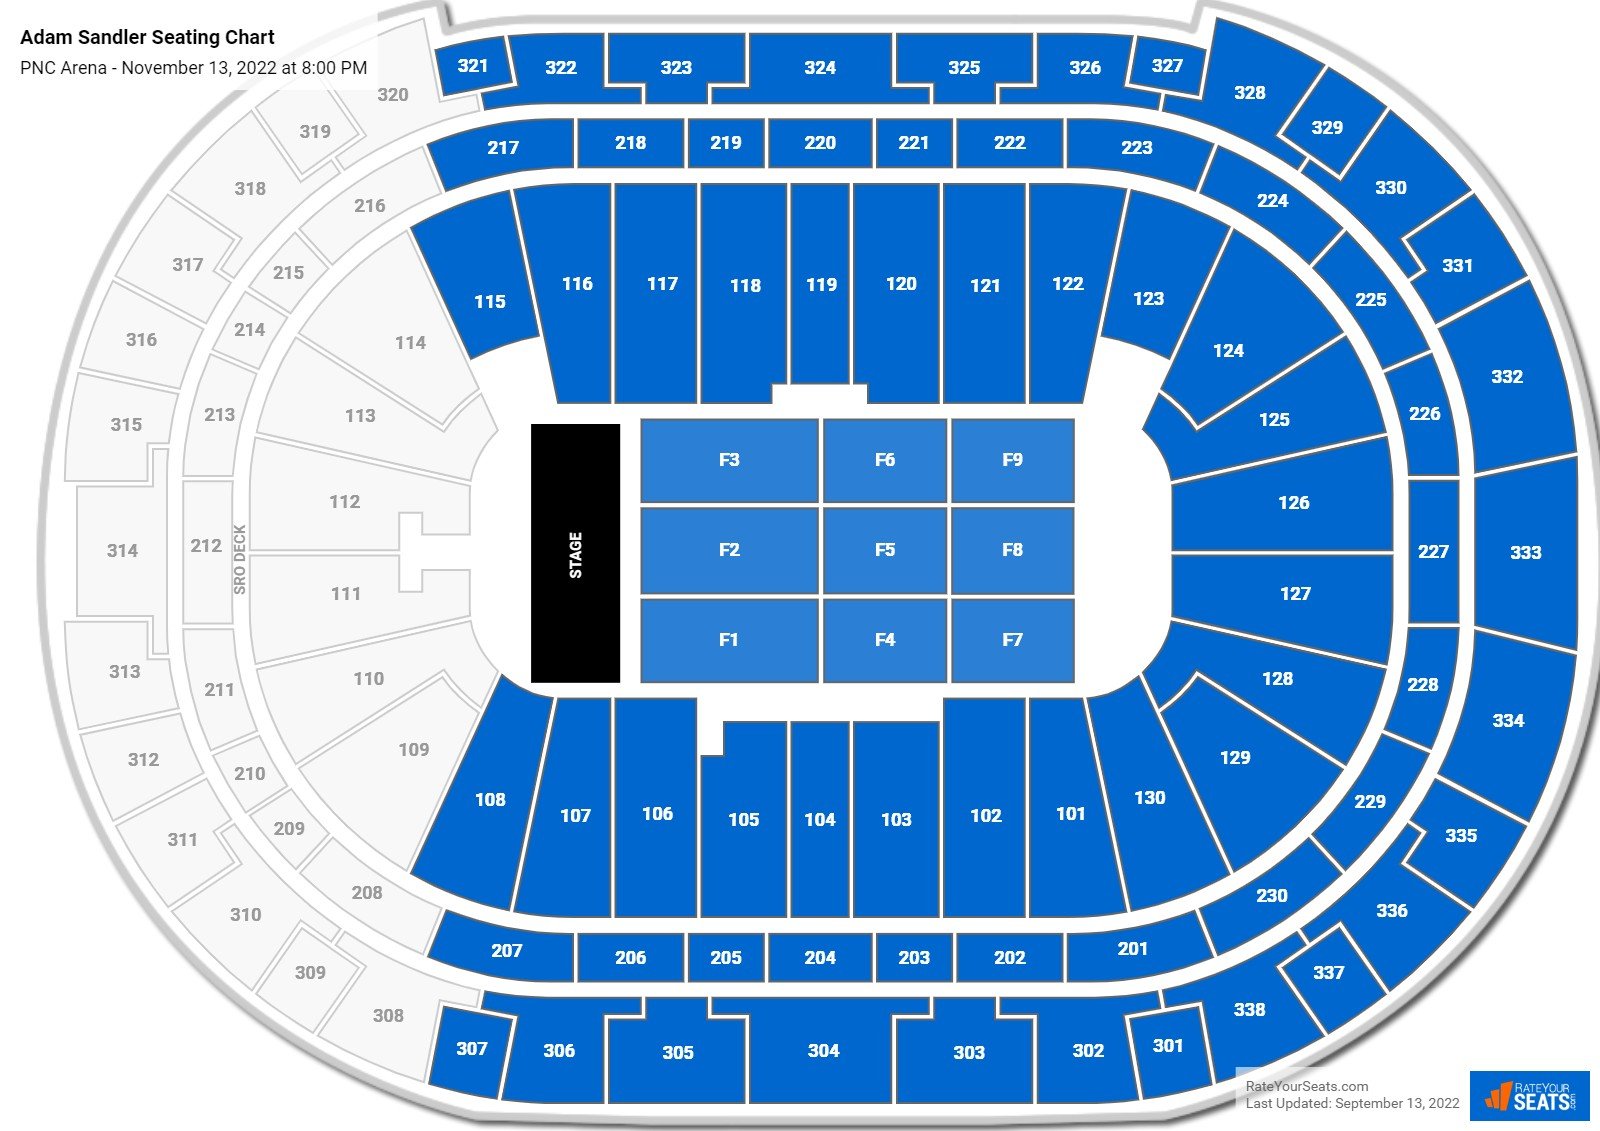 PNC Arena Concert Seating Chart